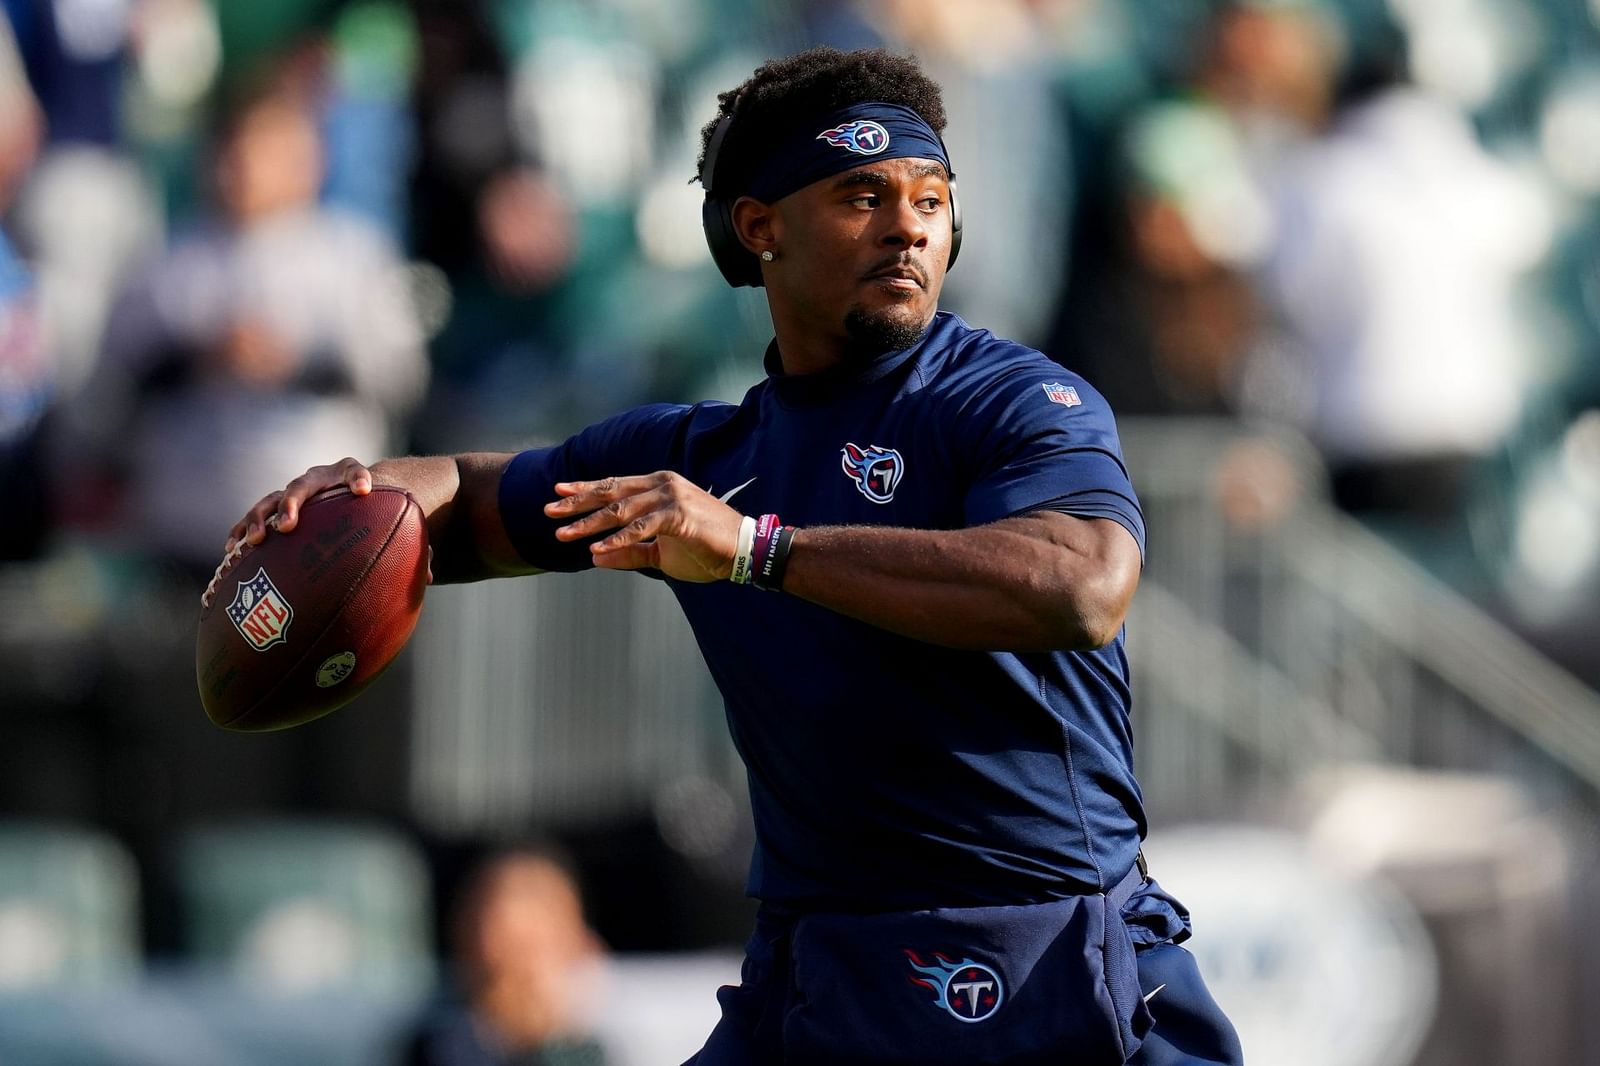 Who is the Titans’ starting QB tonight vs the Cowboys? TNF update on